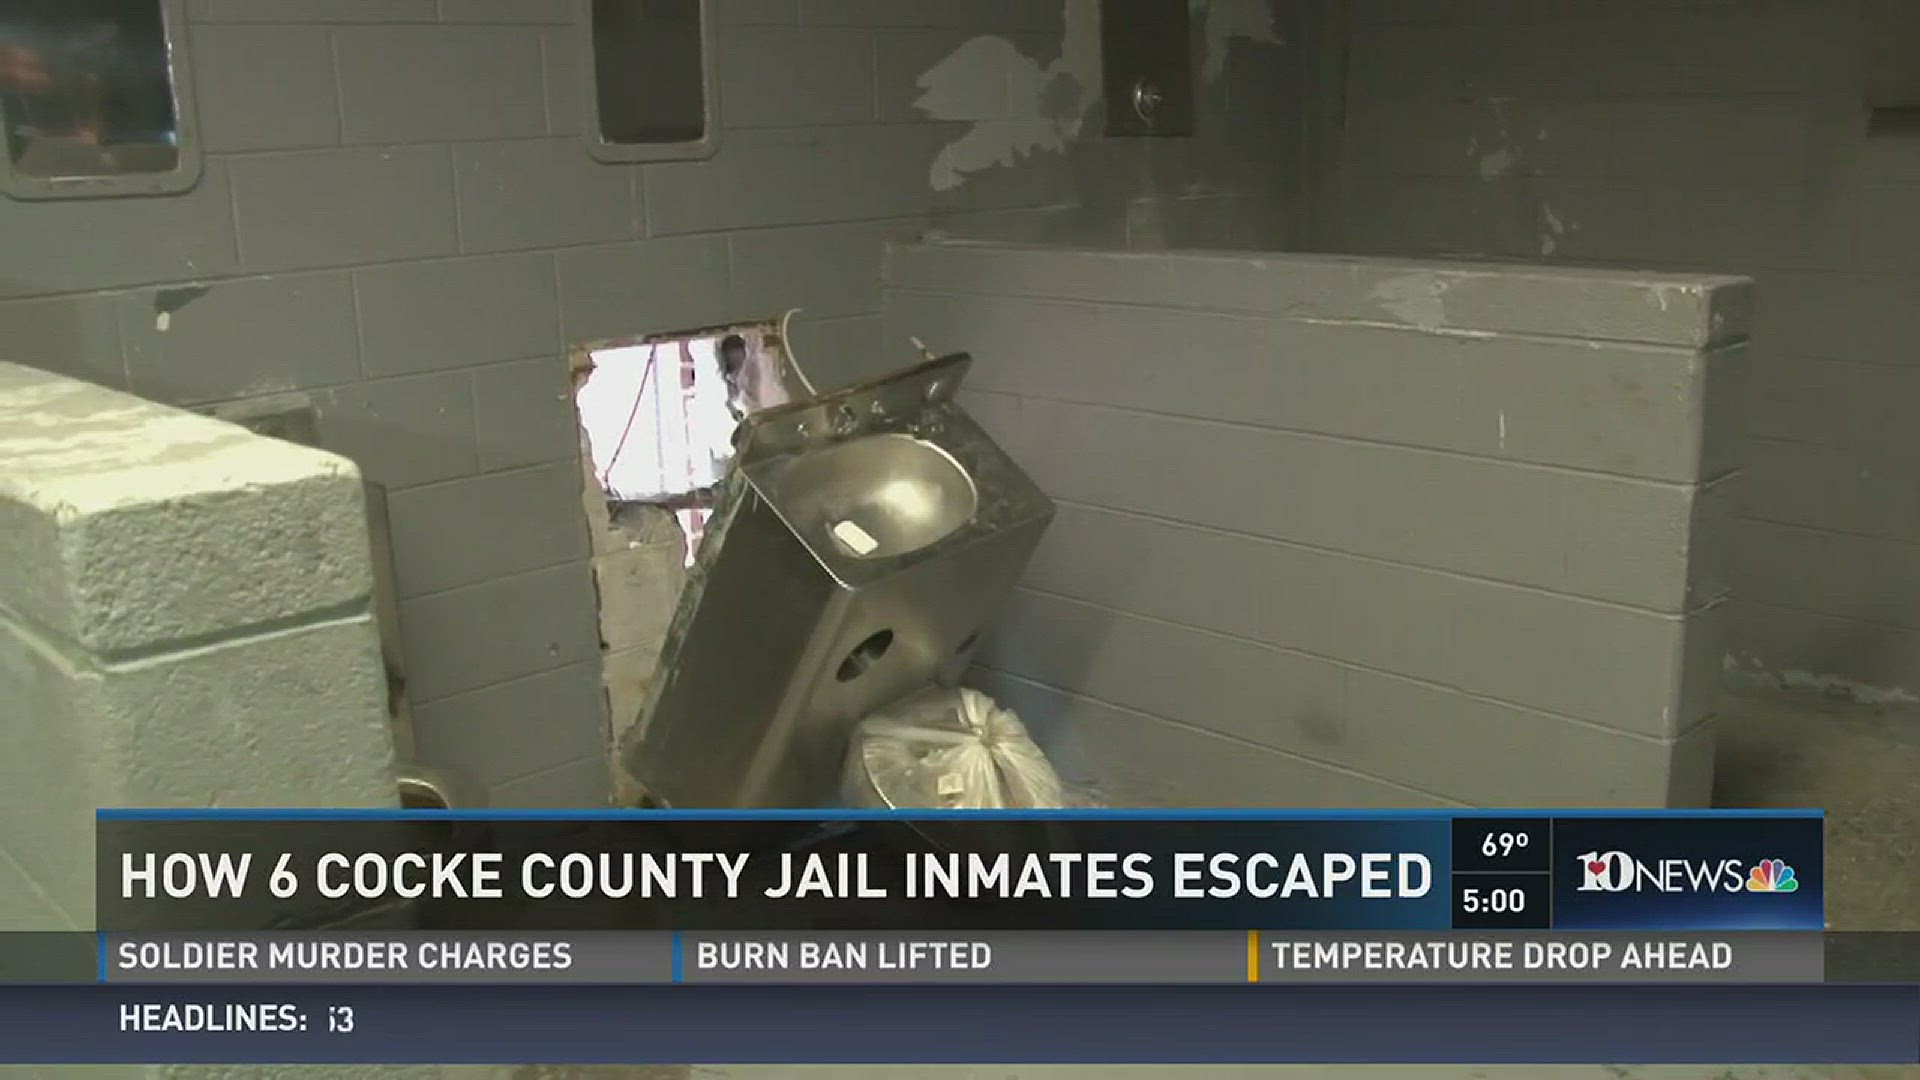 Dec. 26, 2016: Three inmates are back in custody after officials say six men escaped from the Cocke County Jail Annex early on Christmas morning.